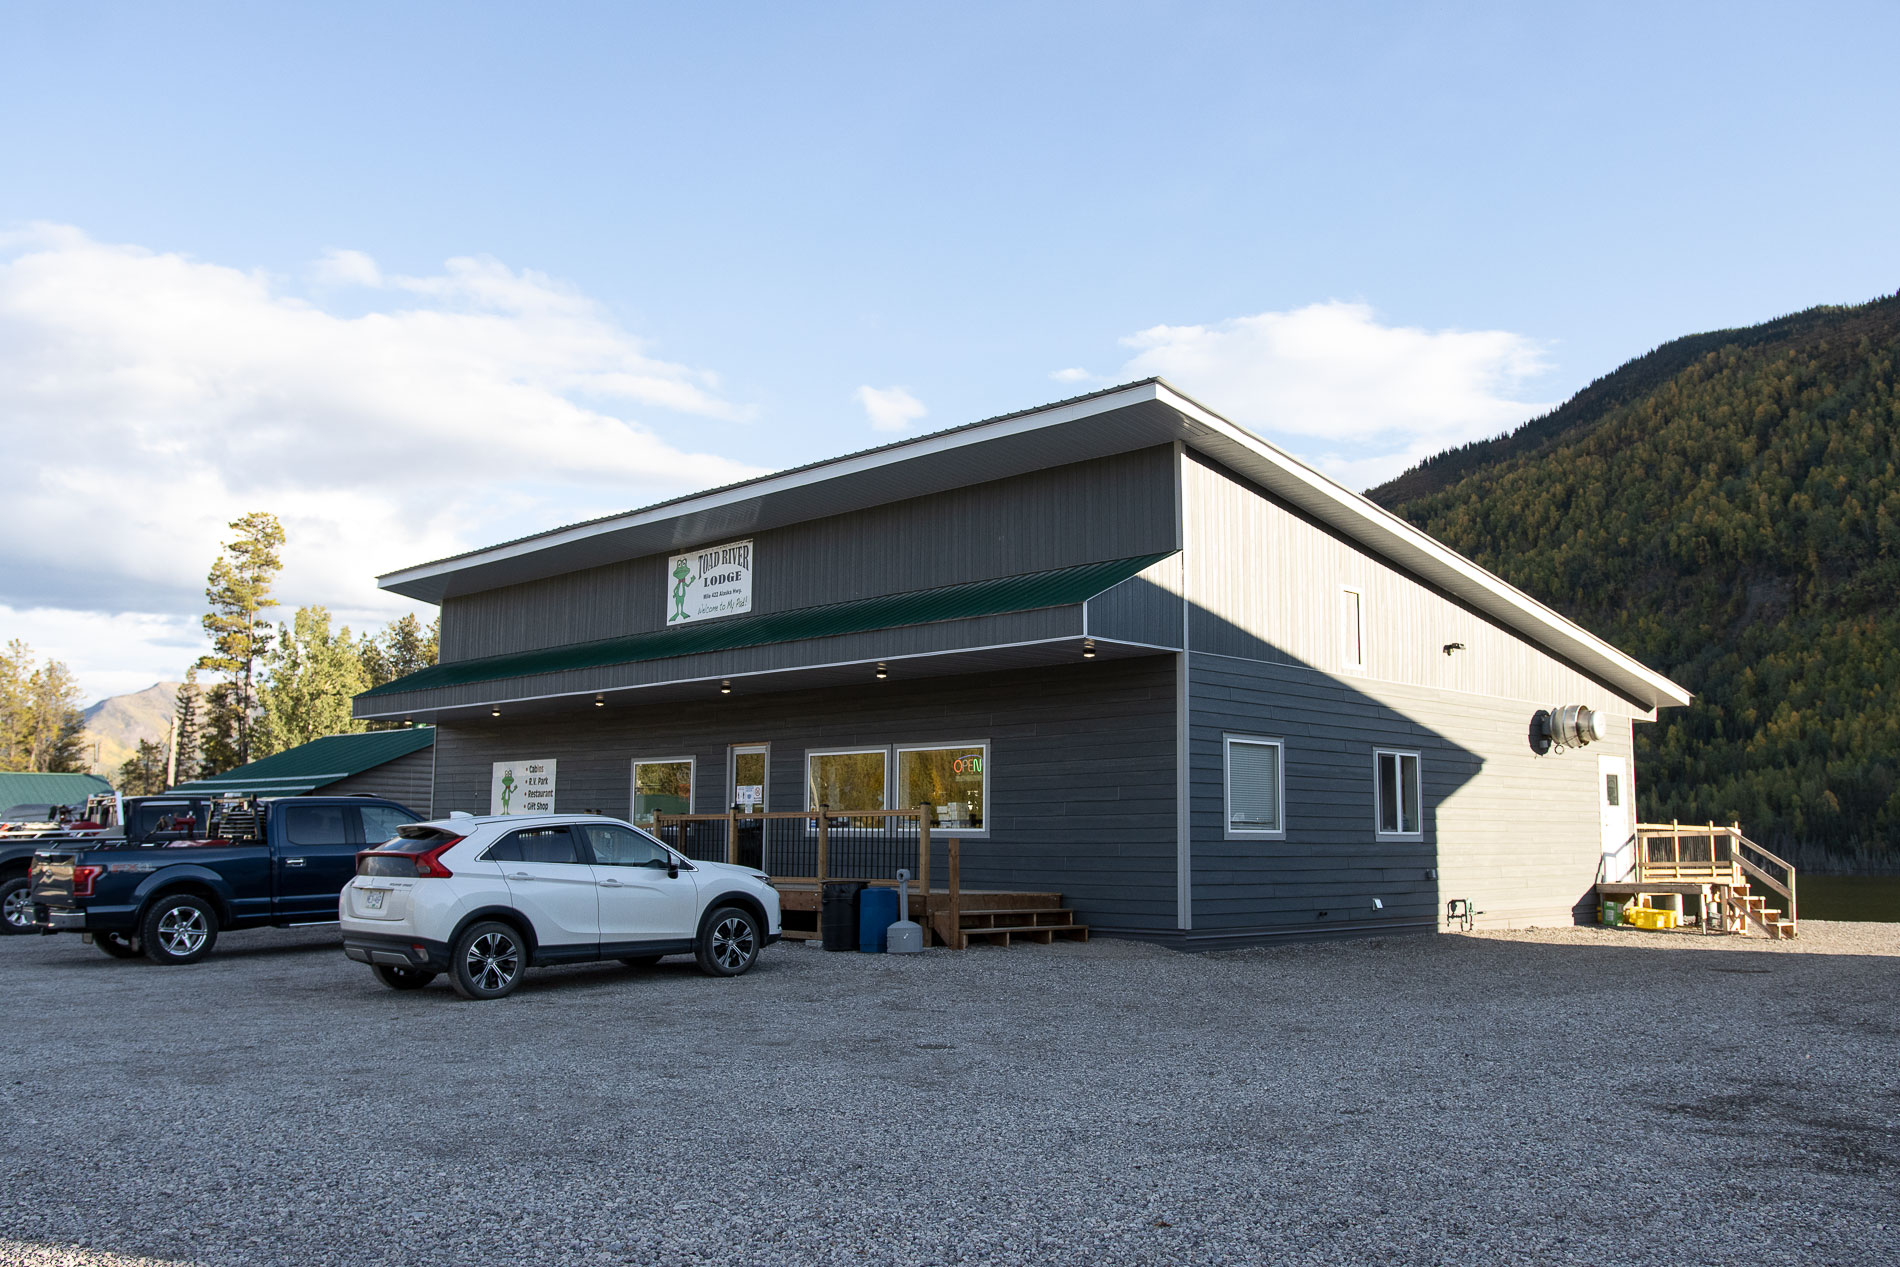 Toad River Lodge is open every day of the year on the Alaska Highway.